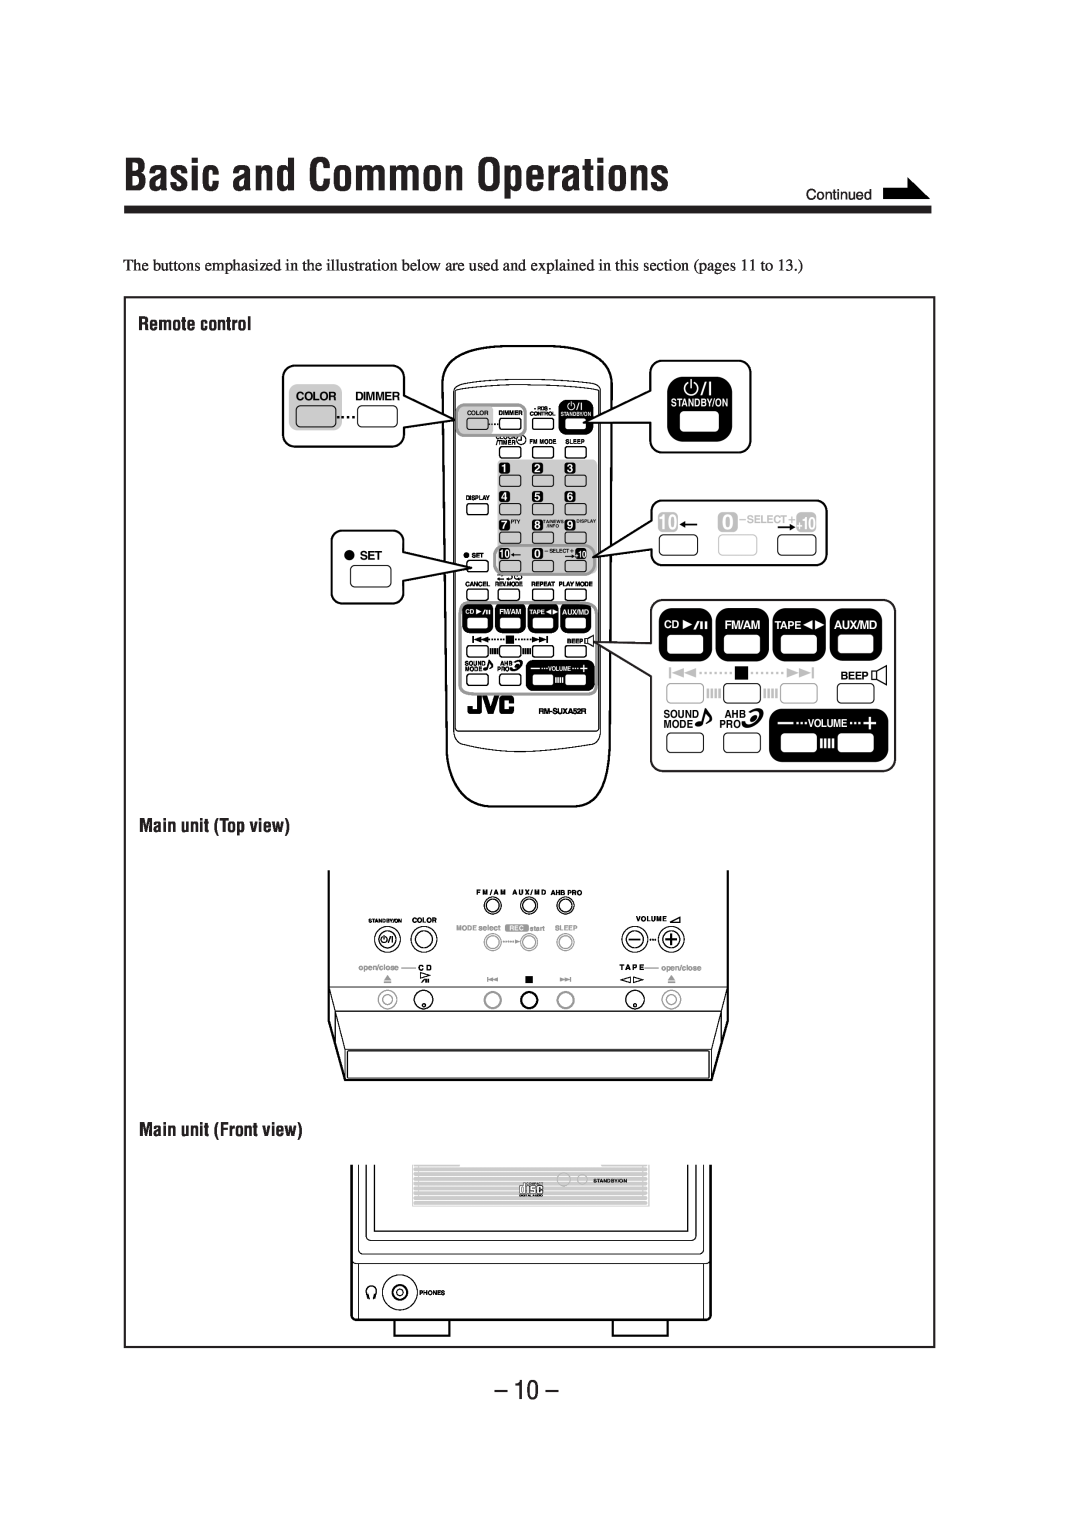 JVC UX-A52R Basic and Common Operations, Main unit Top view, Main unit Front view, Remote control, Continued, Color Dimmer 